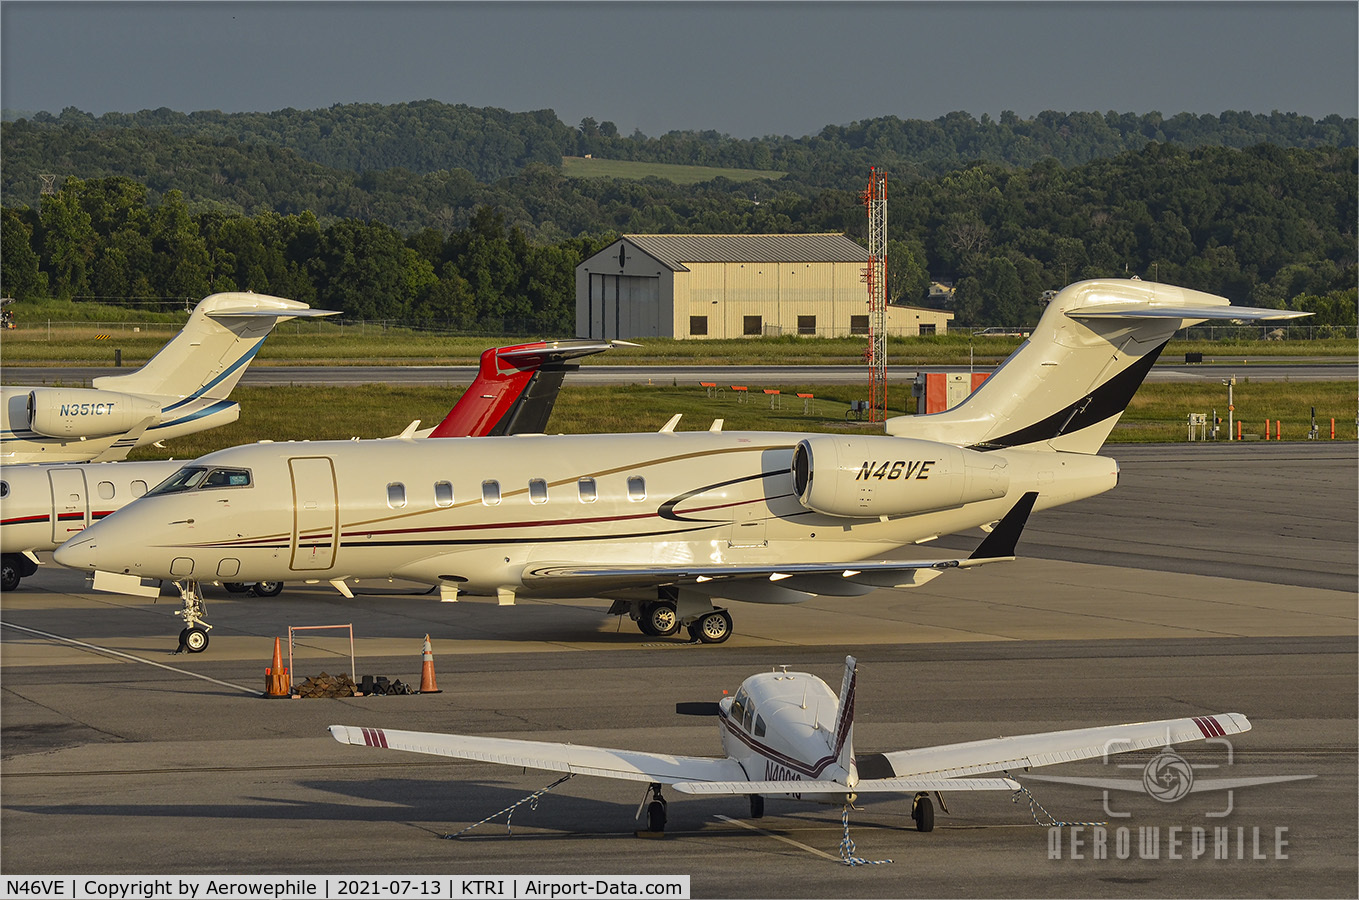 N46VE, 2013 Bombardier BD-100-1A10 Challenger 300 C/N 20396, Parked at Tri-Cities Airport (KTRI)
13Jul21